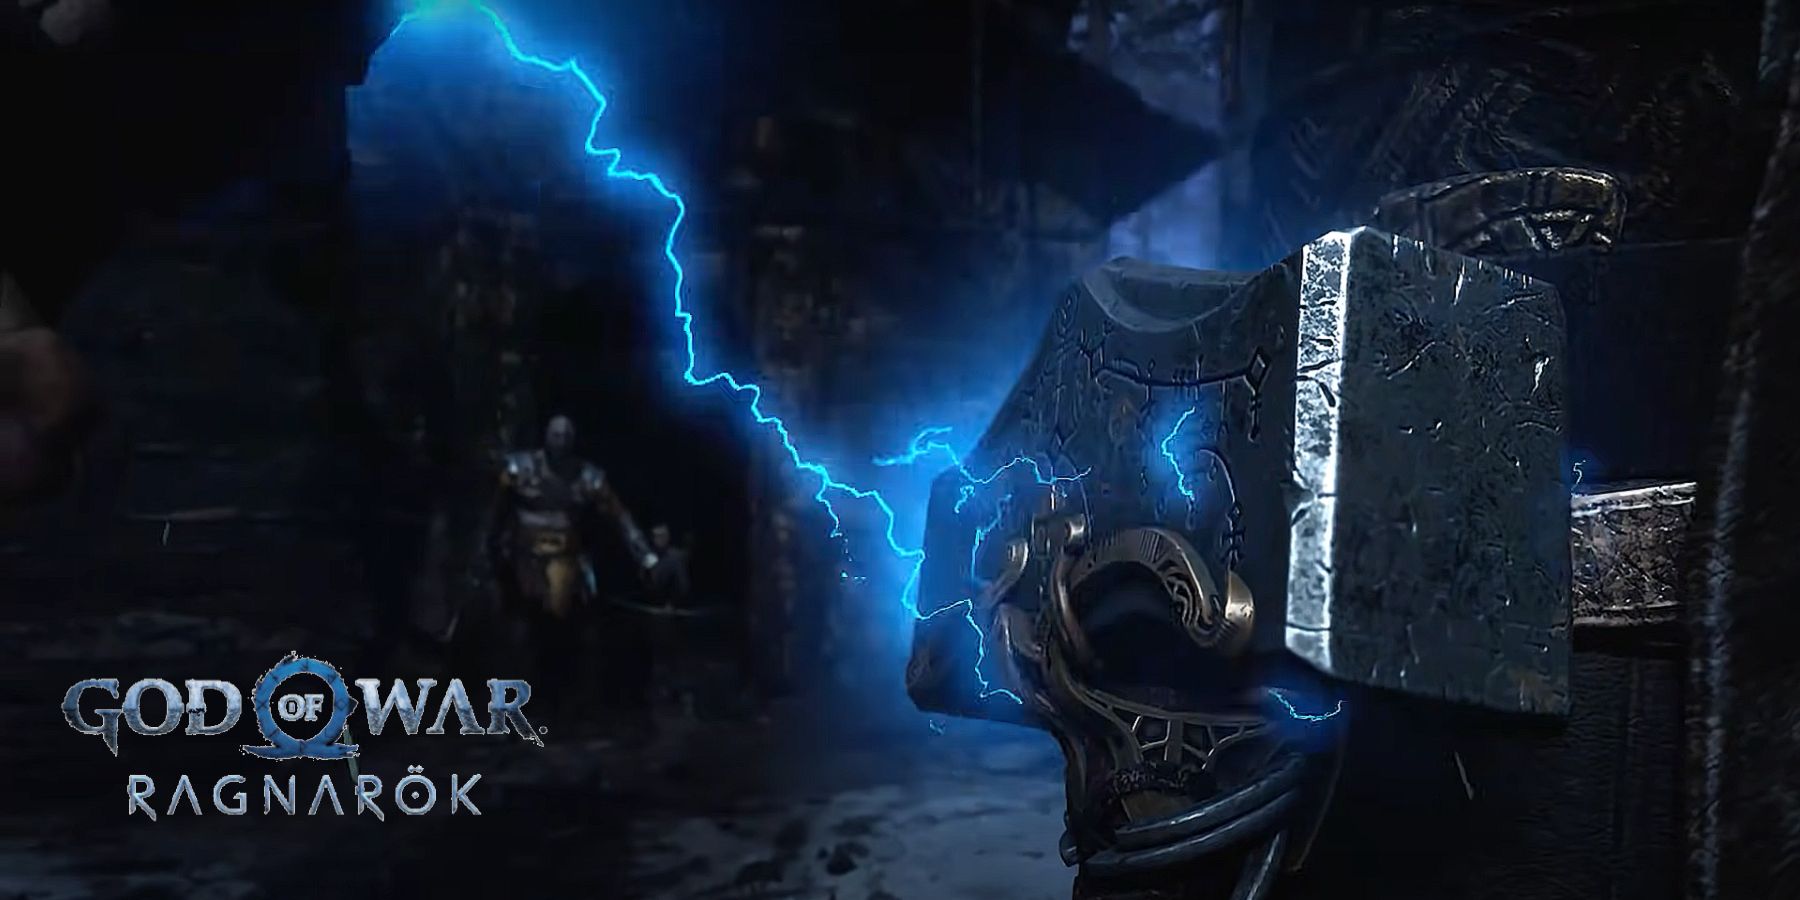 First Full Look at Thor Released for 'GOD OF WAR: RAGNAROK